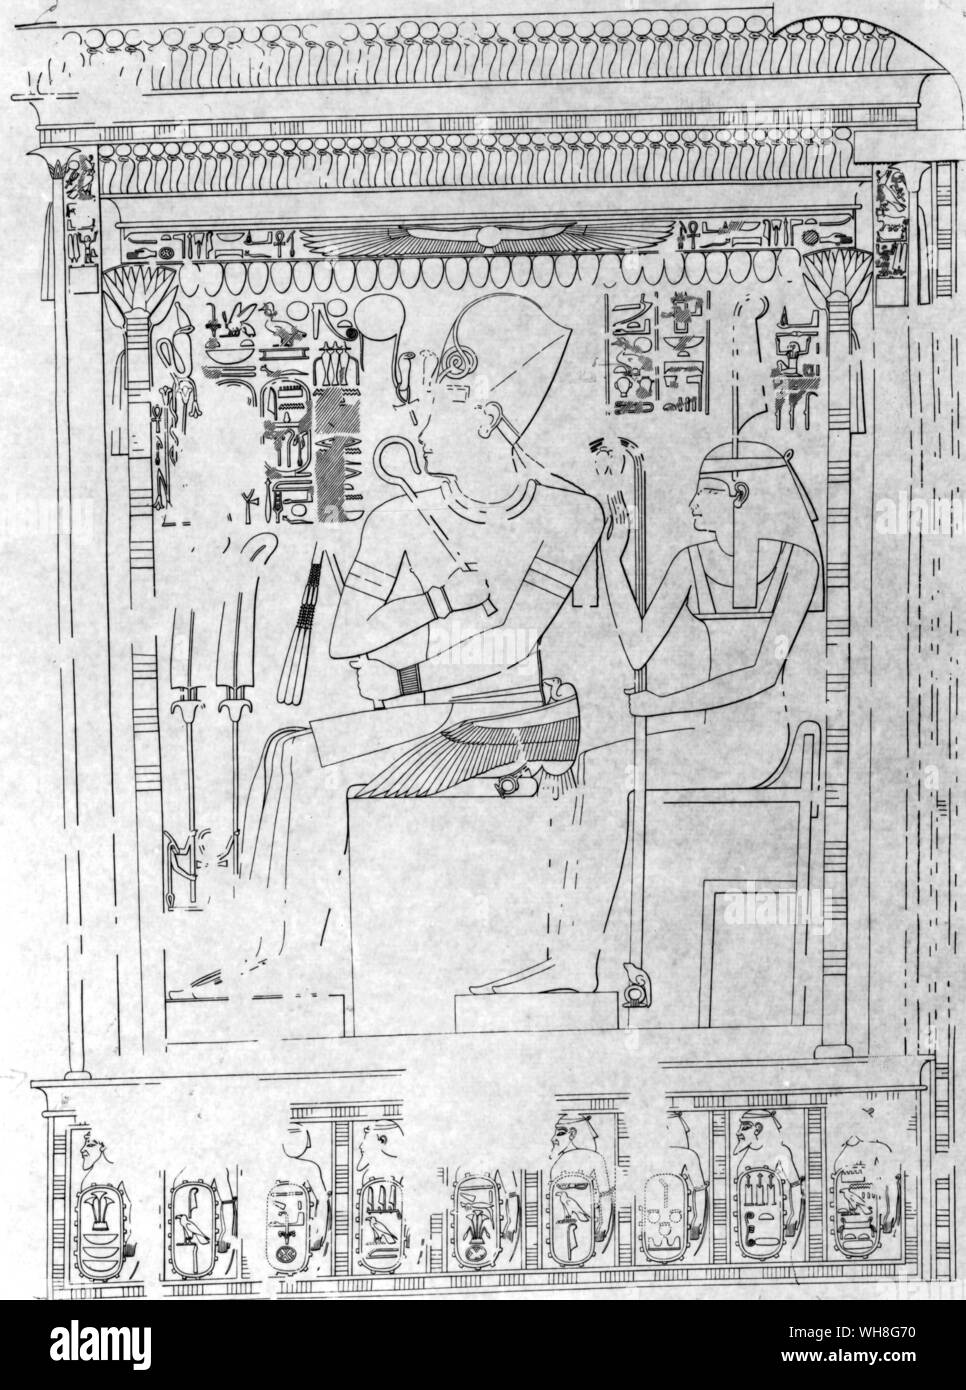 Amenophis III with the Maet enthroned beneath the double canopy of his palace, in the Theban style. Tutankhamen by Christiane Desroches Noblecourt, page 127.. Stock Photo